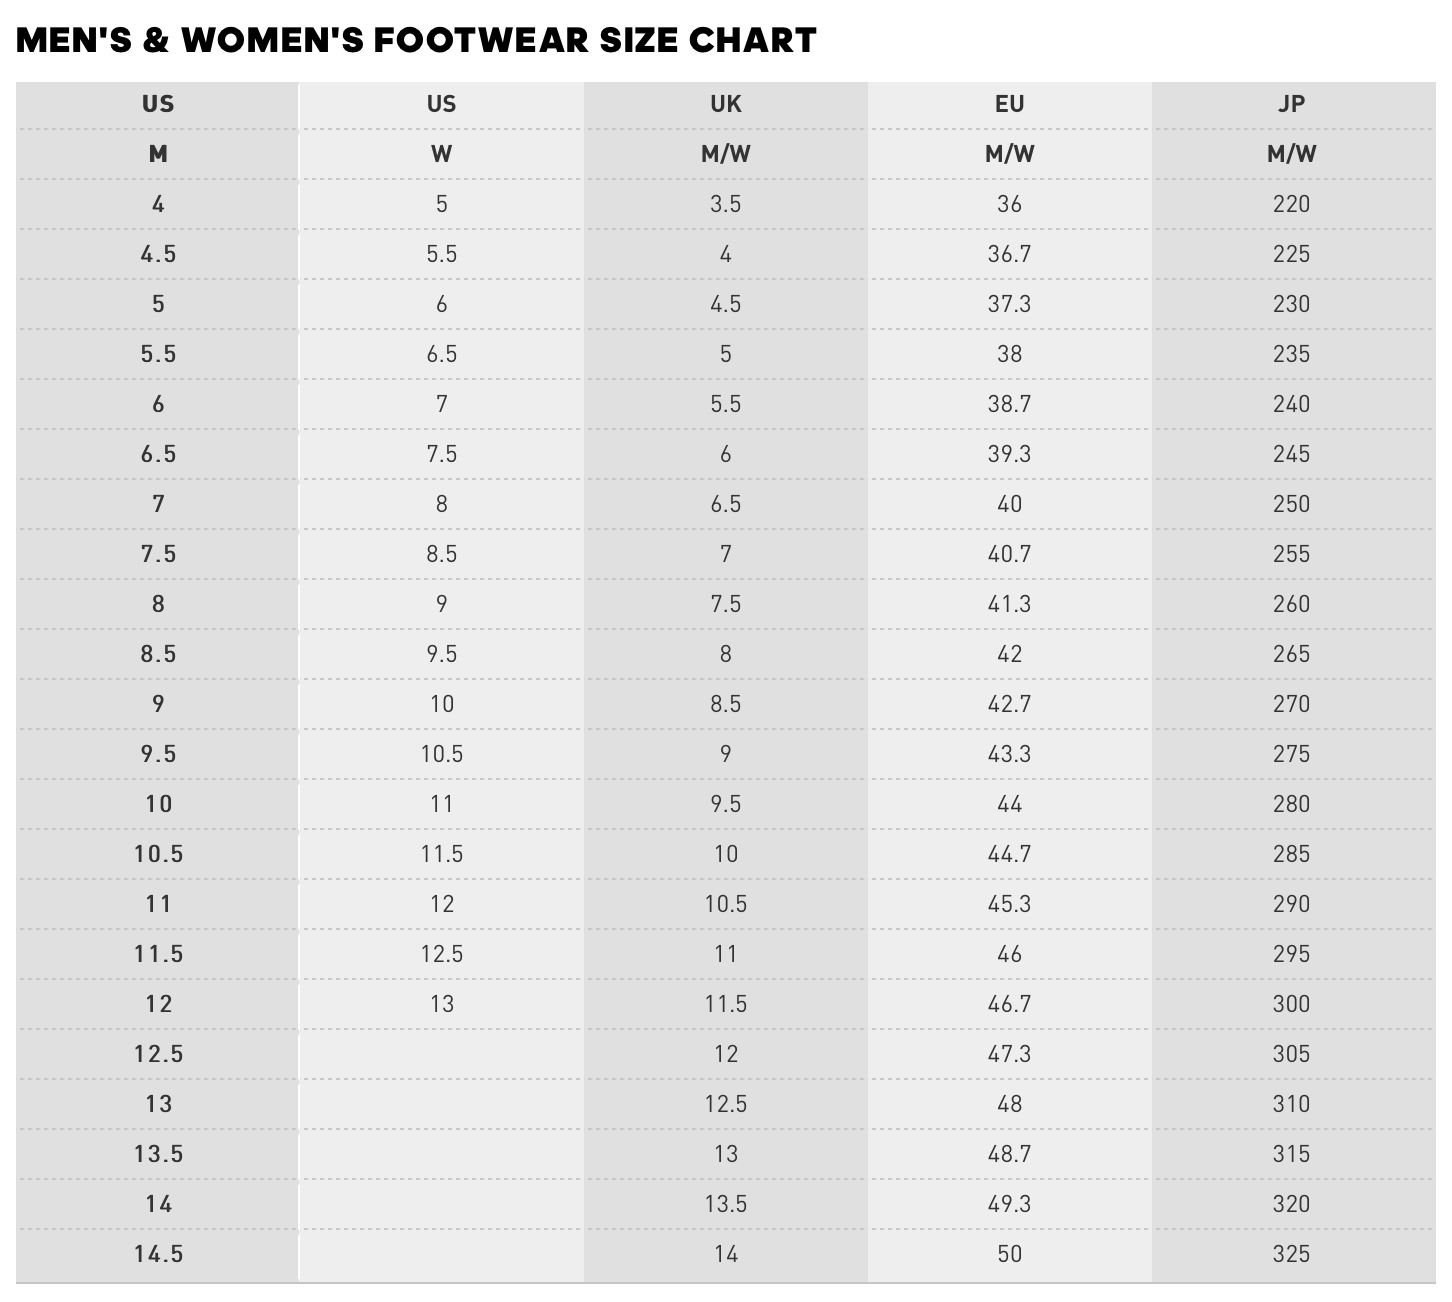 adidas men's shoe size compared to women's